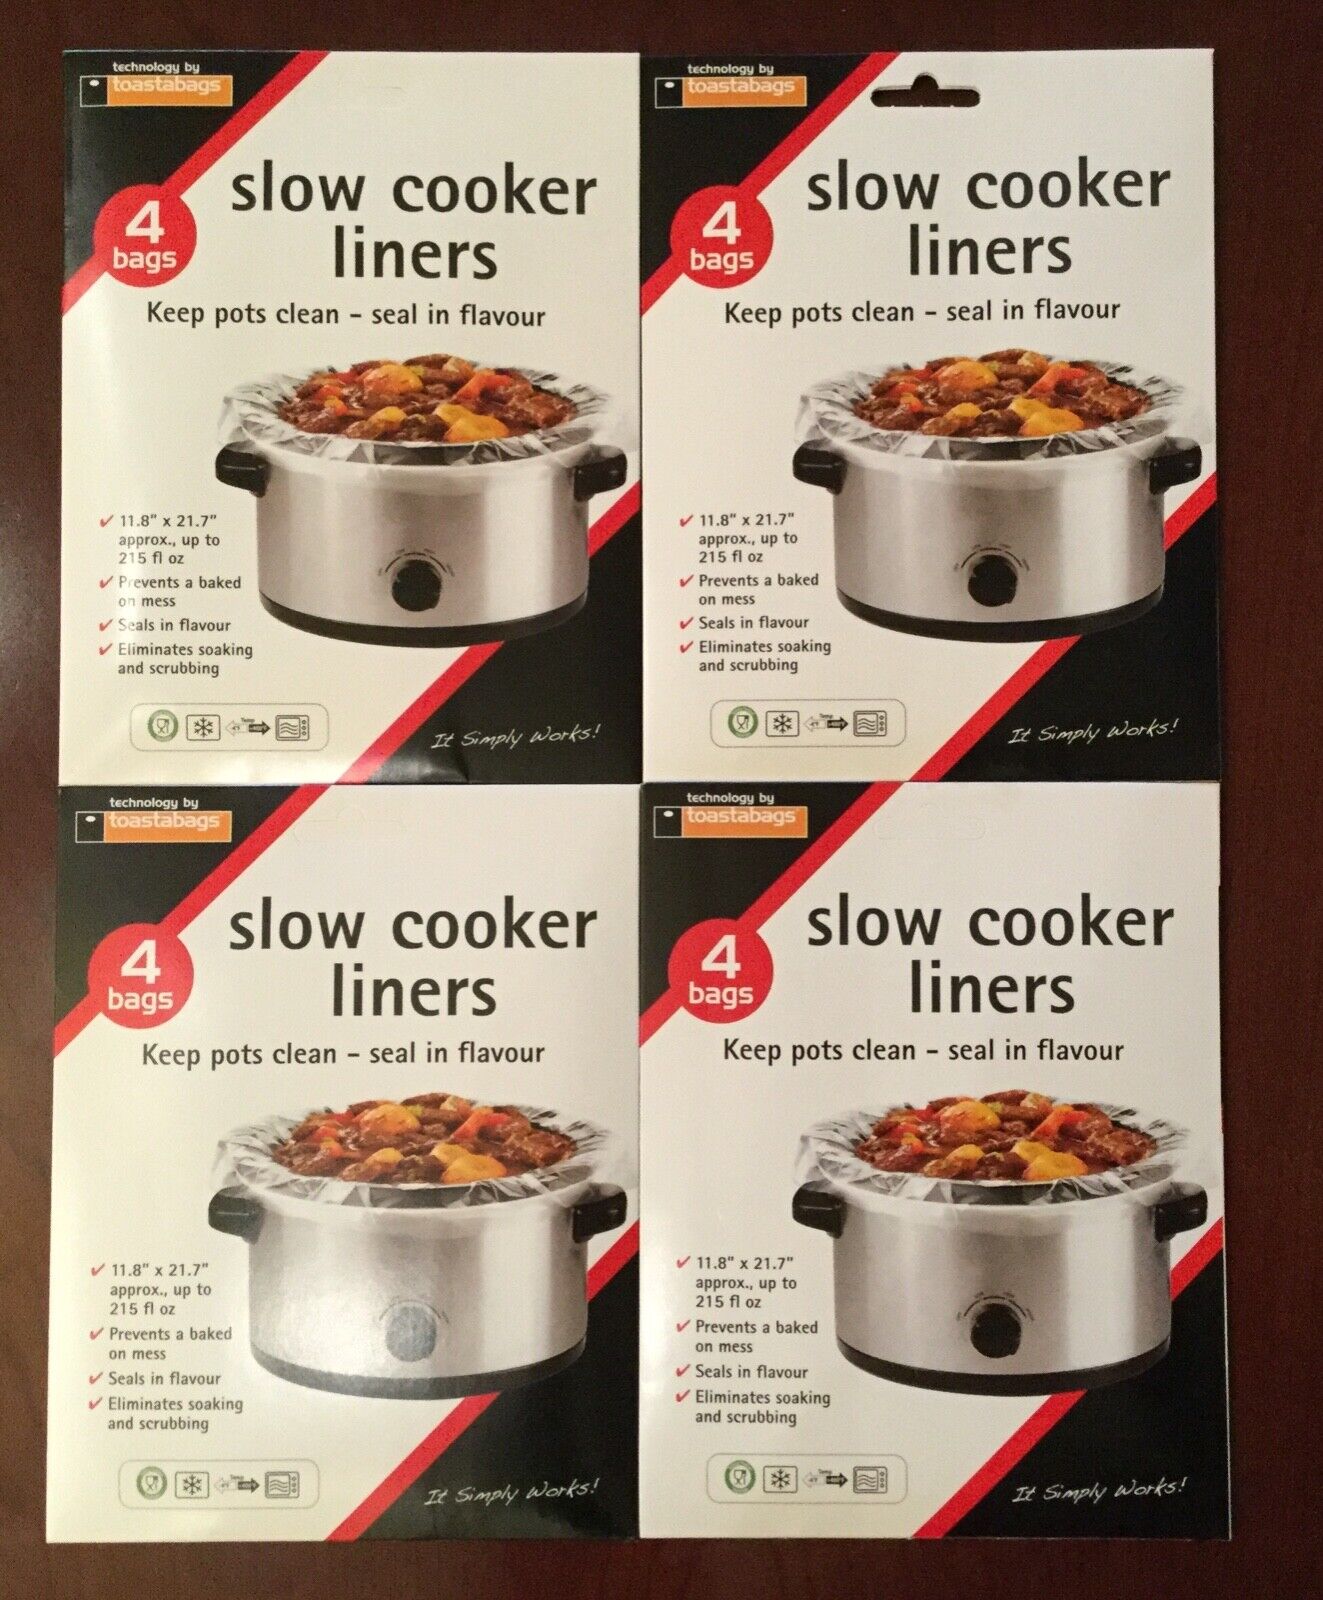 16 Toastabags Crock Pot Slow Cooker Liners bags 11.8” x 21.7” up to 215 fl oz